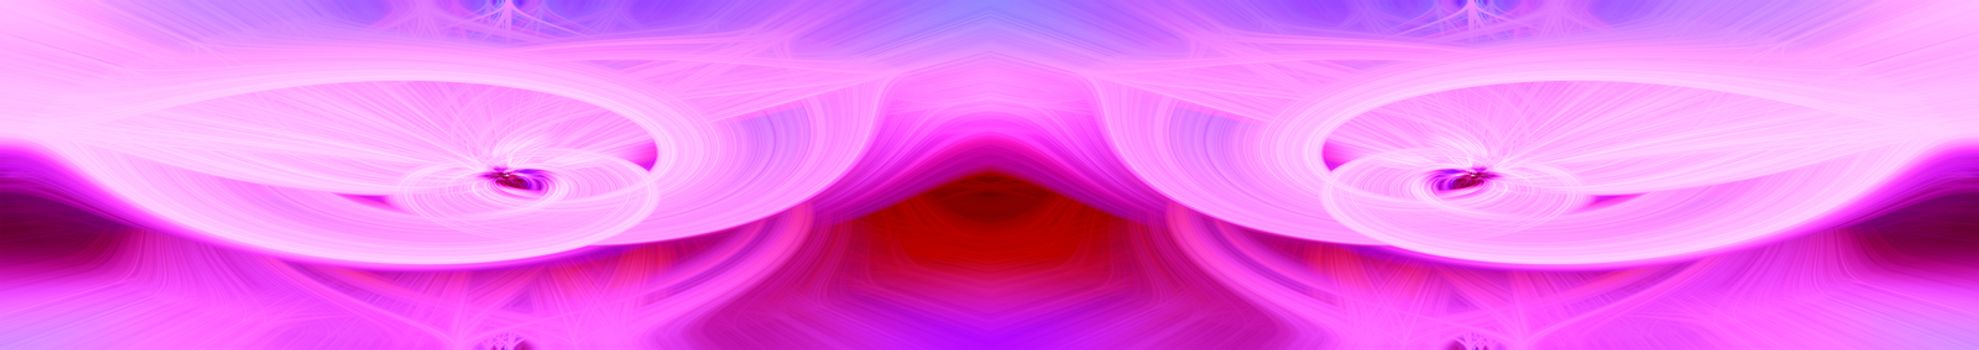 Beautiful abstract intertwined glowing 3d fibers forming a shape of sparkle, flame, flower, interlinked hearts. Pink, purple, and maroon colors. Banner size. Illustration.